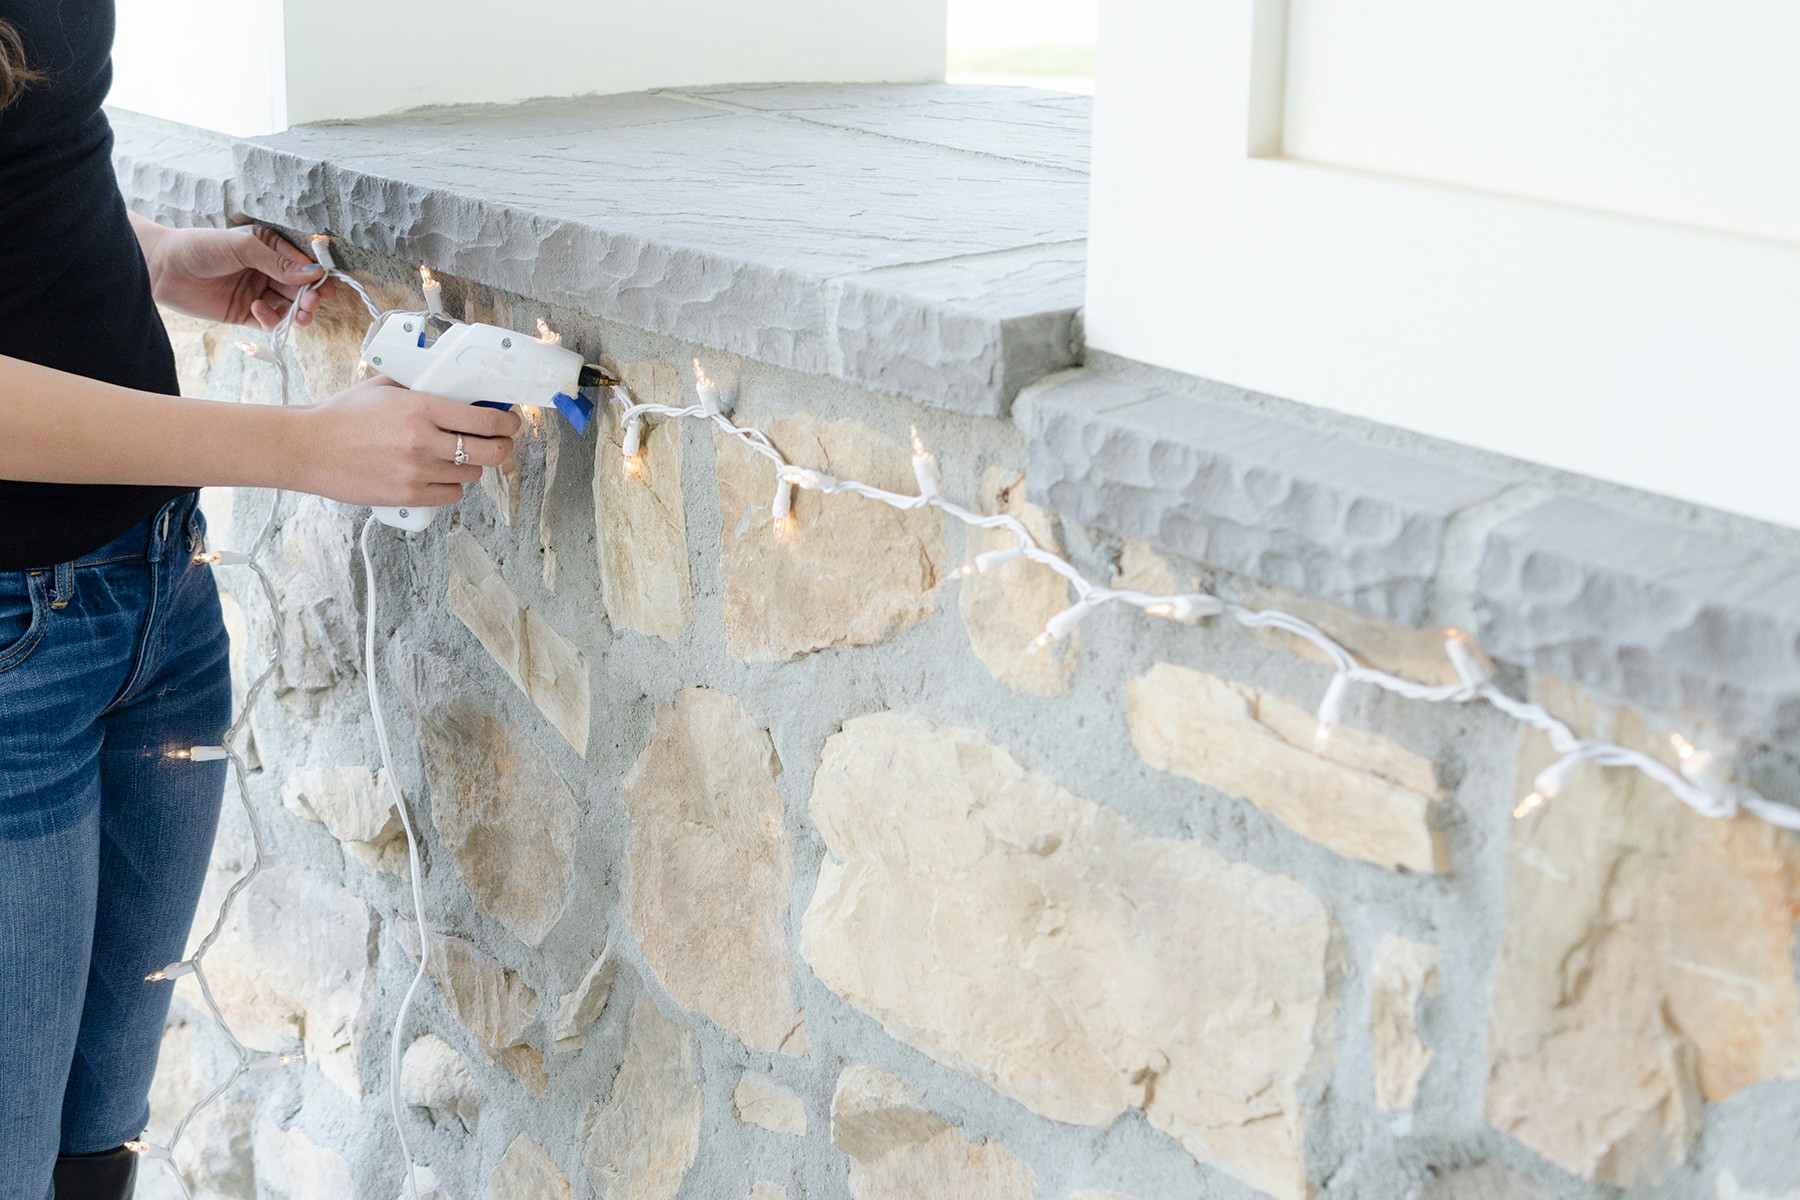 A person using a hot glue gun and glue to attach white Christmas lights to brick